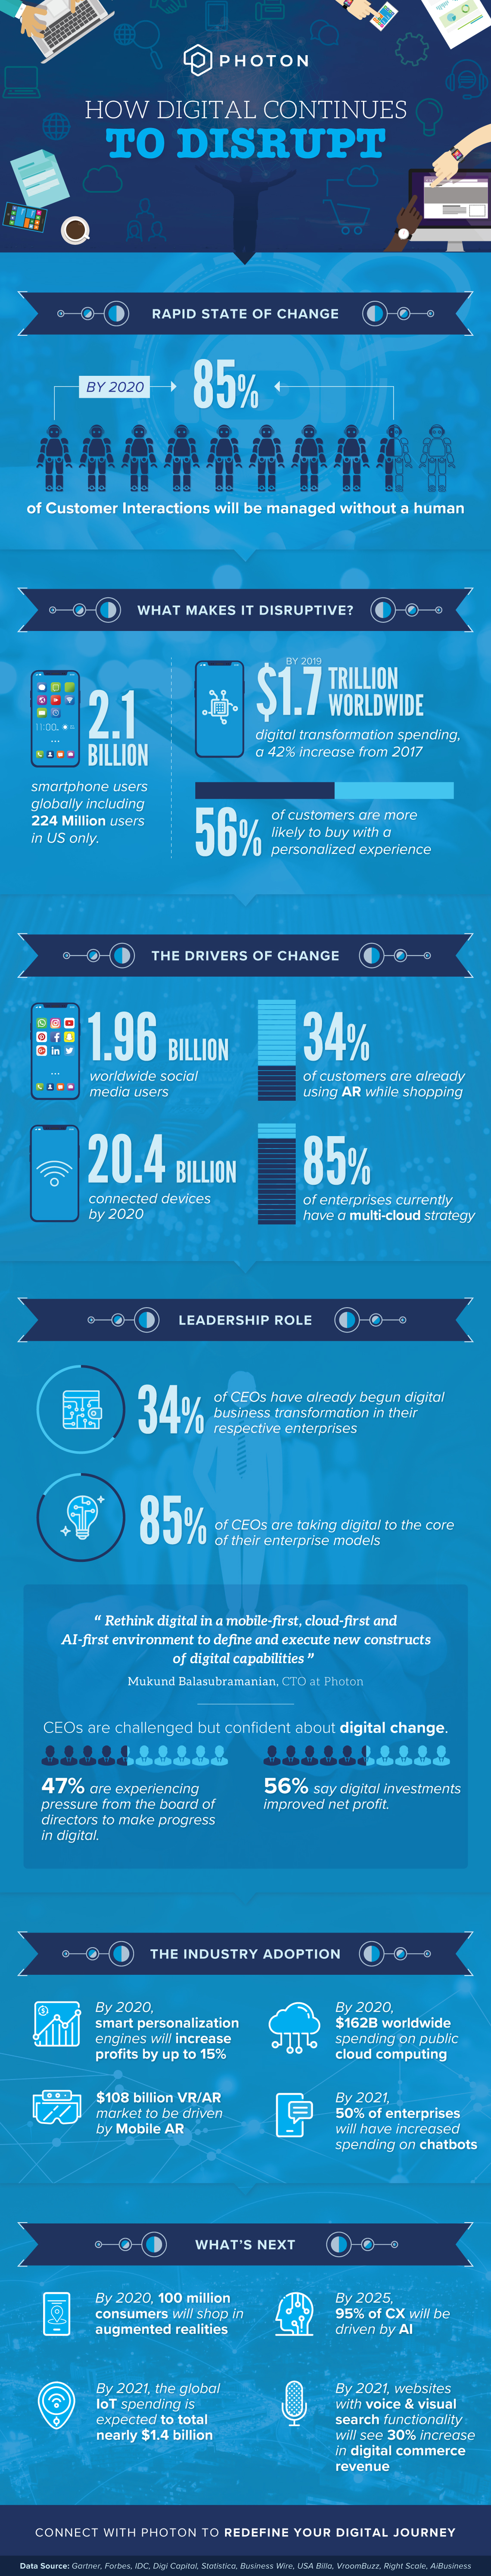 Infographic: How Digital Continues to Disrupt